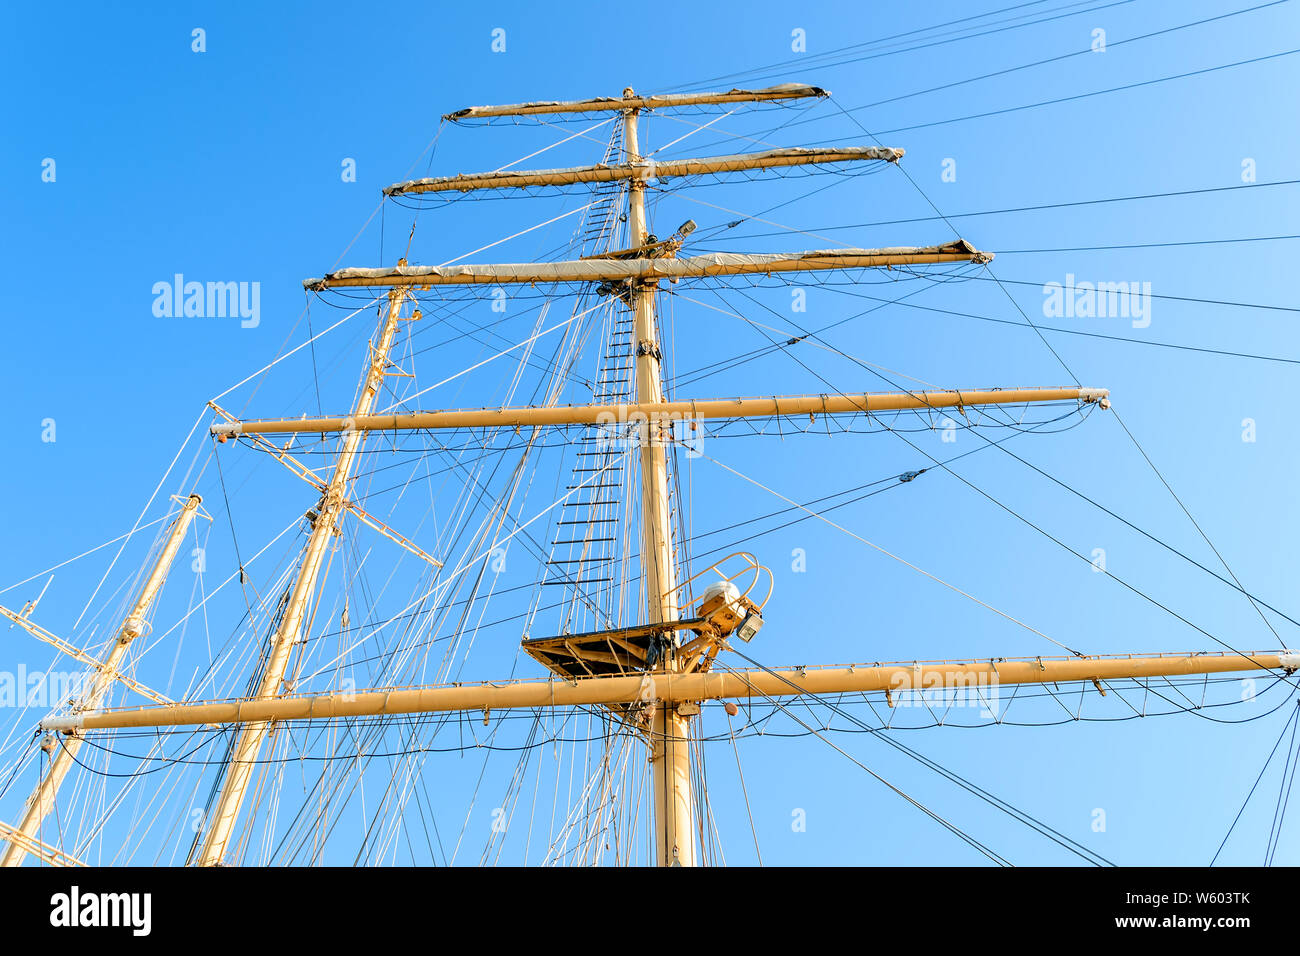 Bottom view of the mast, sail yards with the lowered sails and rigging of a sailing ship against a clear sky on a sunny day. Stock Photo